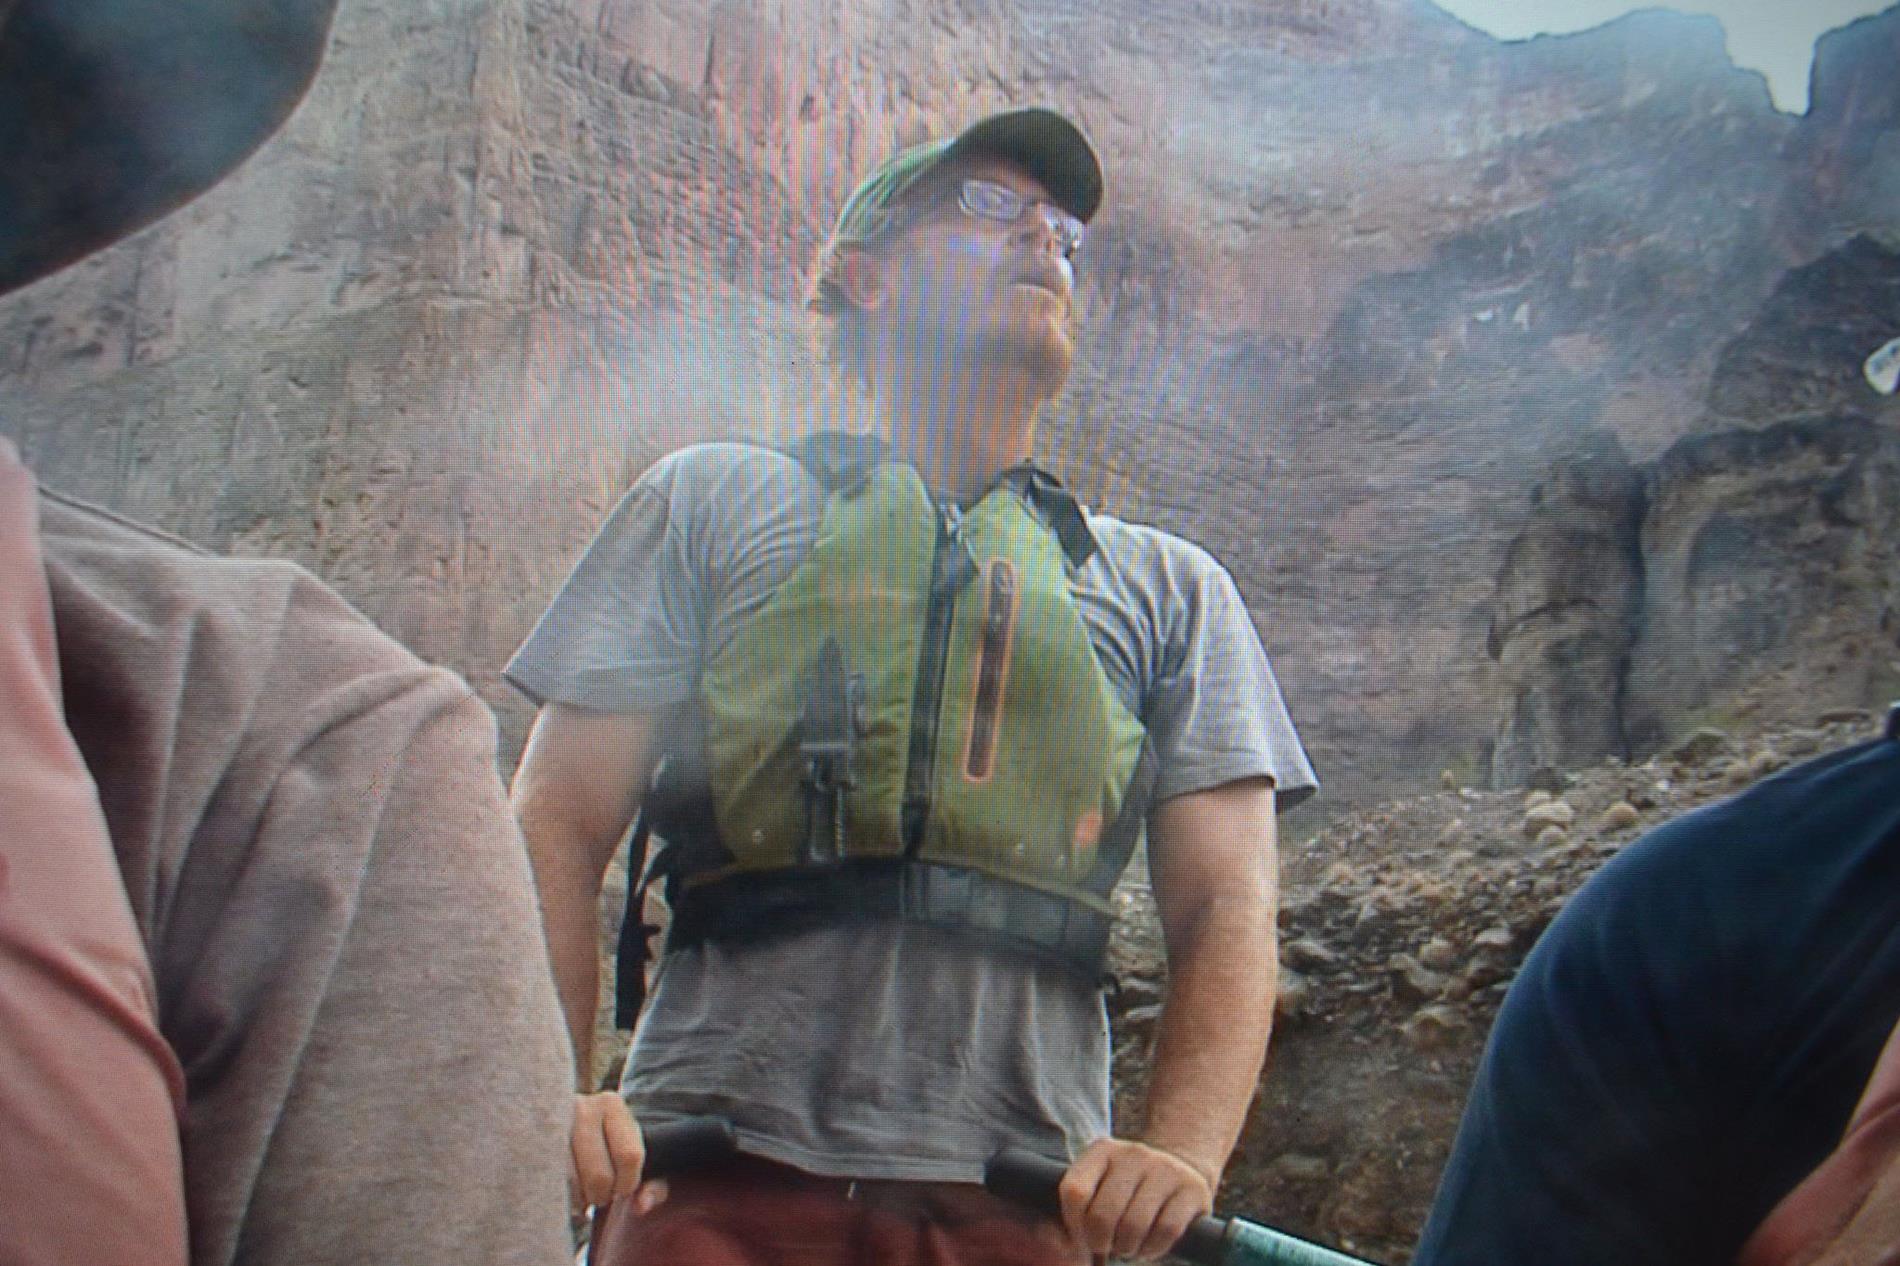 Steven piloting a raft in the Grand Canyon